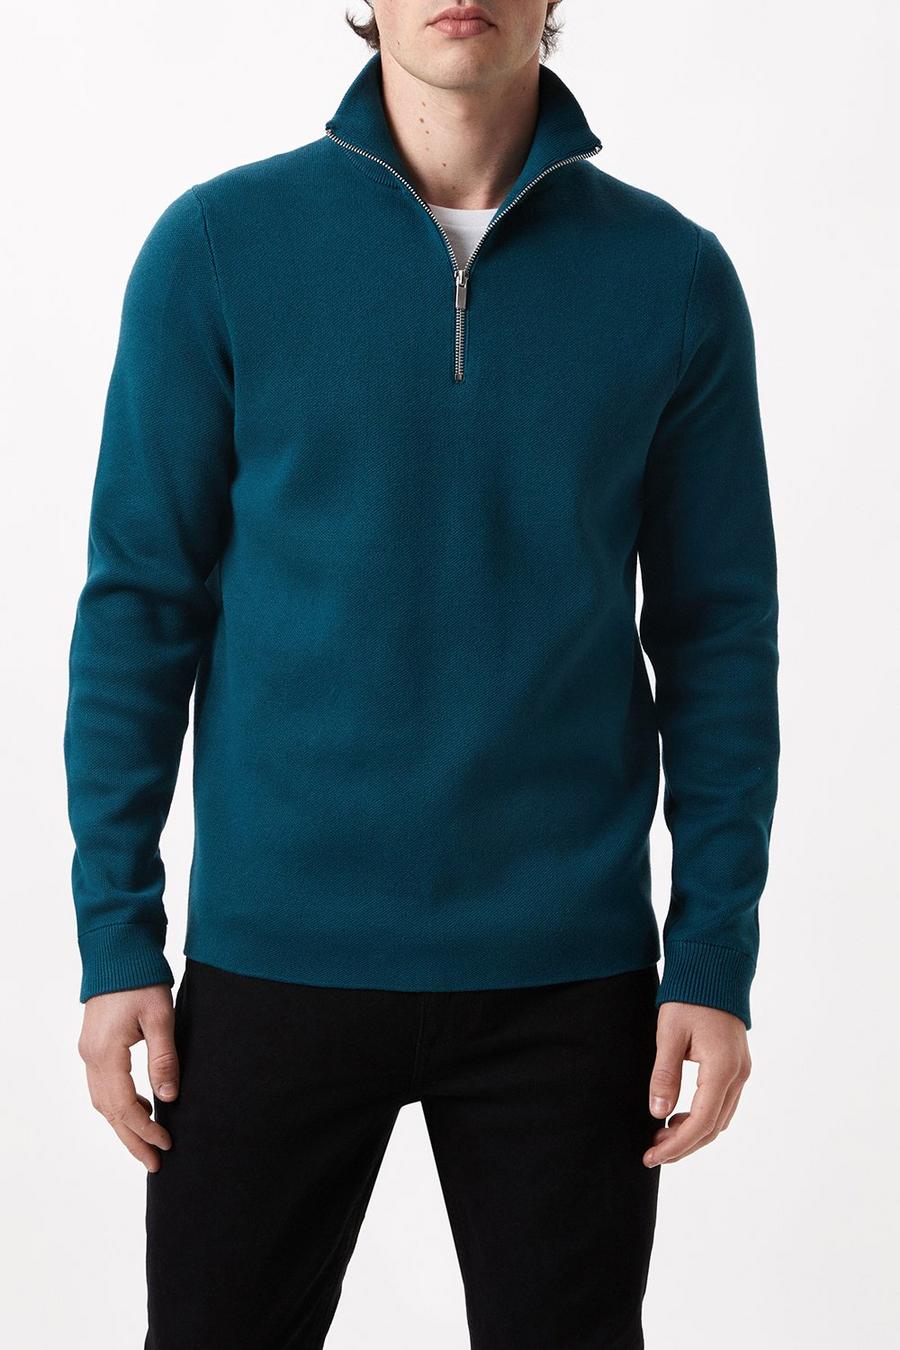 Premium Teal Knitted Zip Funnel Neck